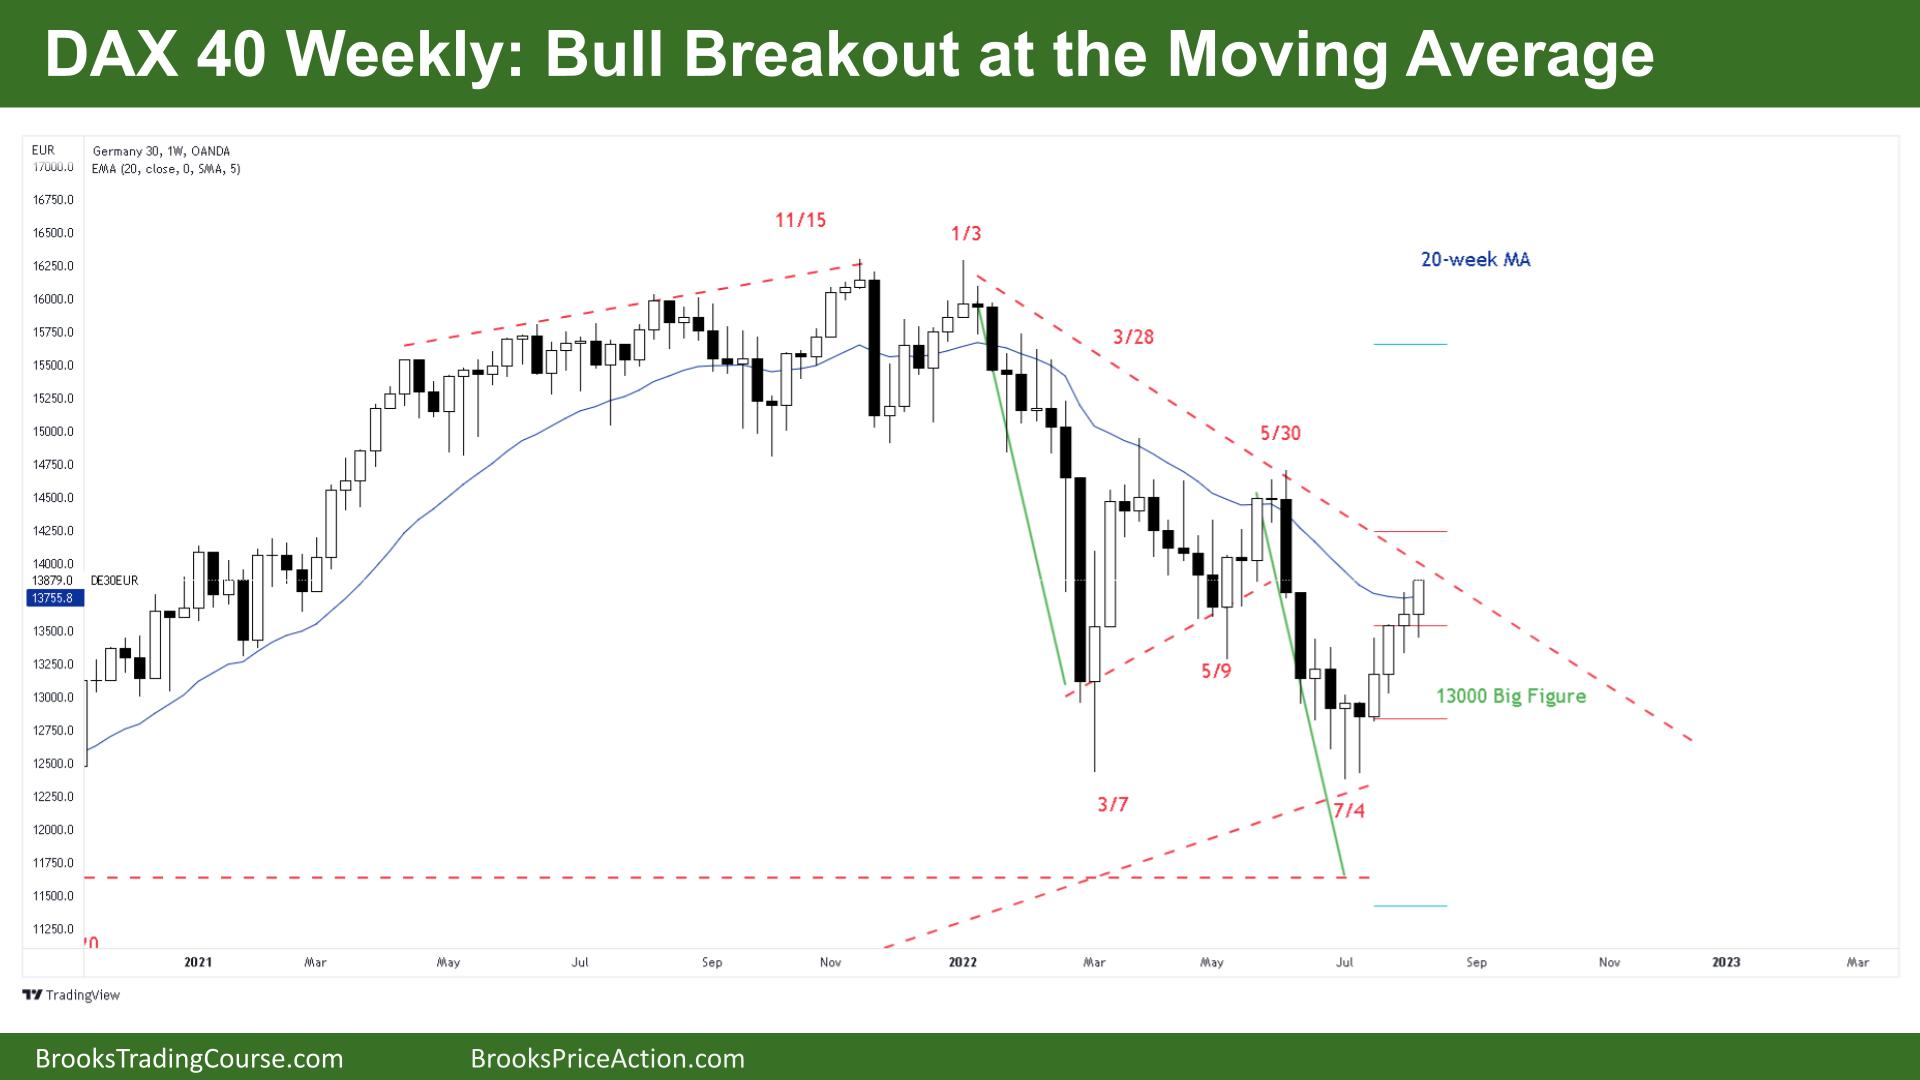 DAX 40 Bull Breakout at the Moving Average on Weekly Chart